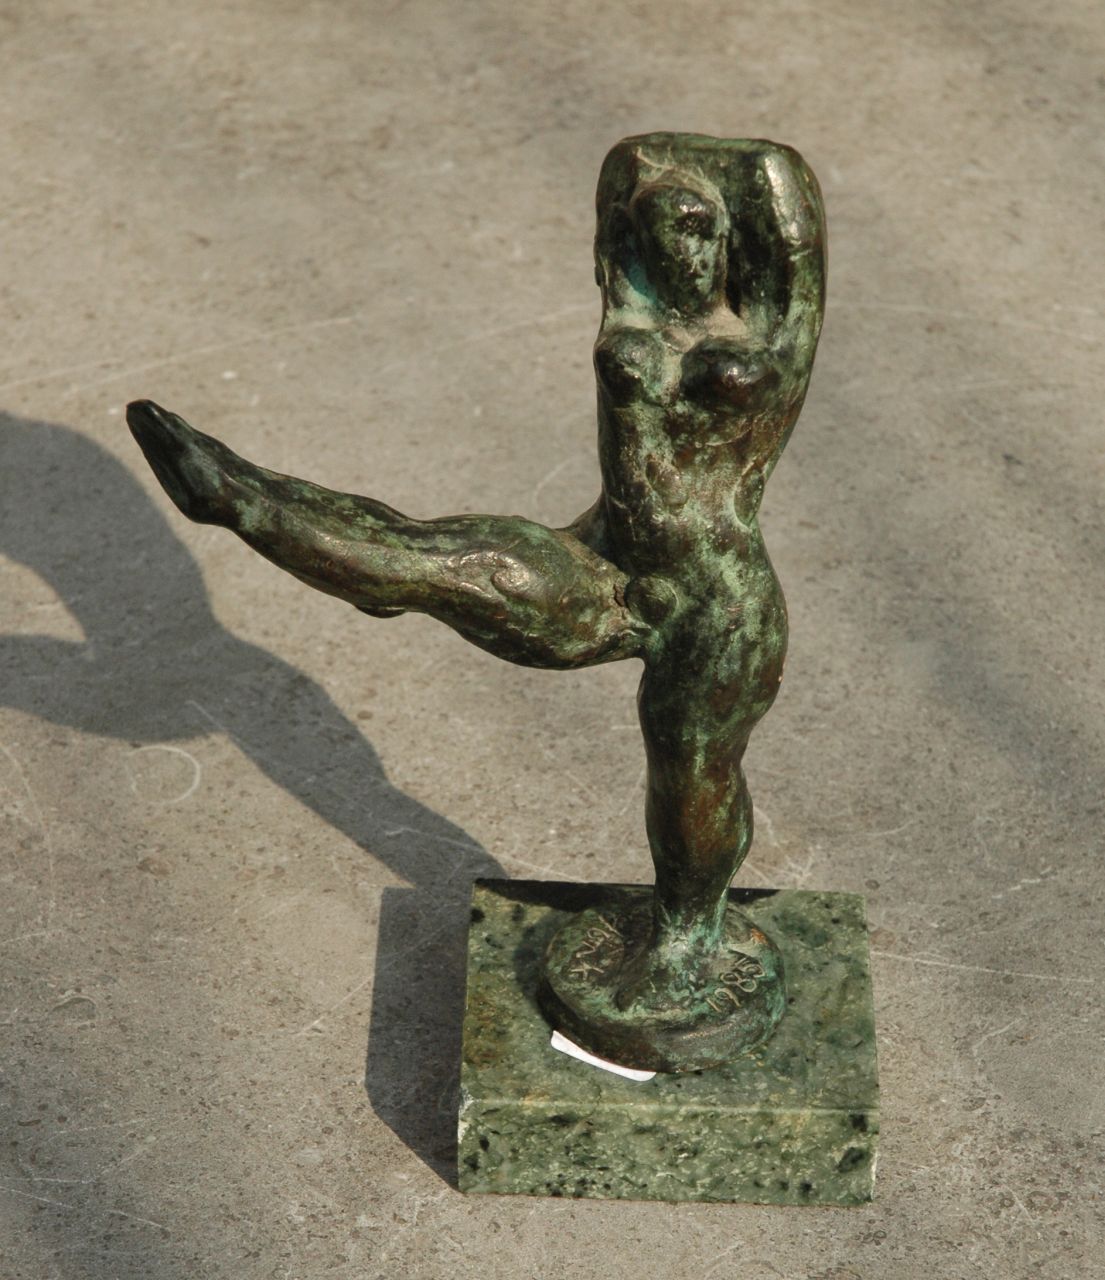 Jonk N.  | Nicolaas 'Nic' Jonk, A dancer with a stretched leg, bronze 15.0 x 9.5 cm, signed on the bronze base and executed 1985